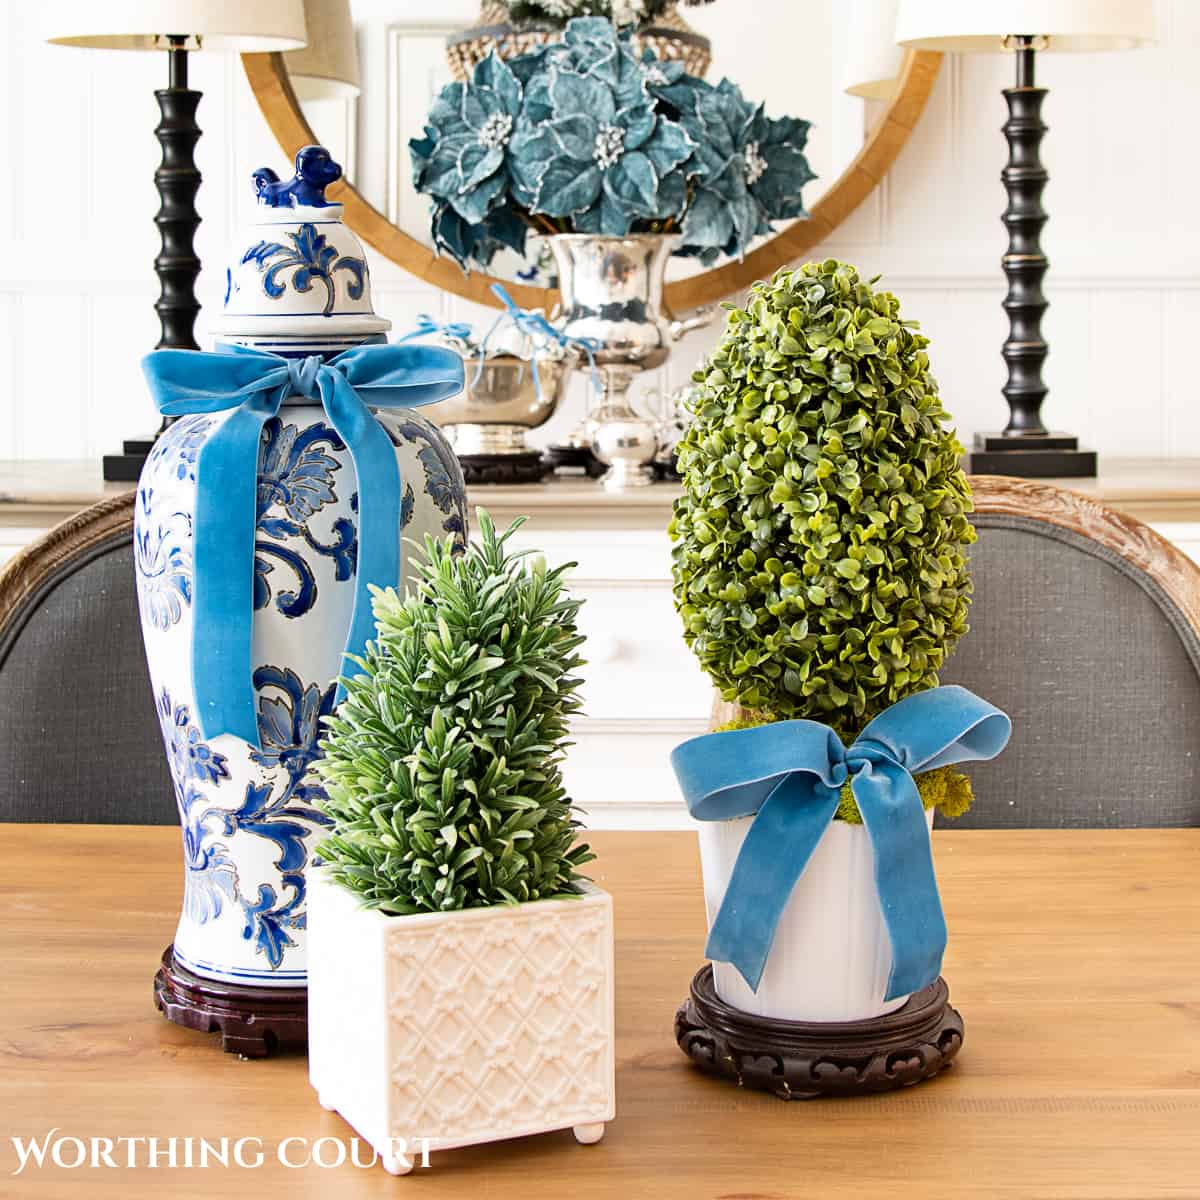 Christmas centerpiece with blue and white ginger jar and topiaries accented with French blue ribbon